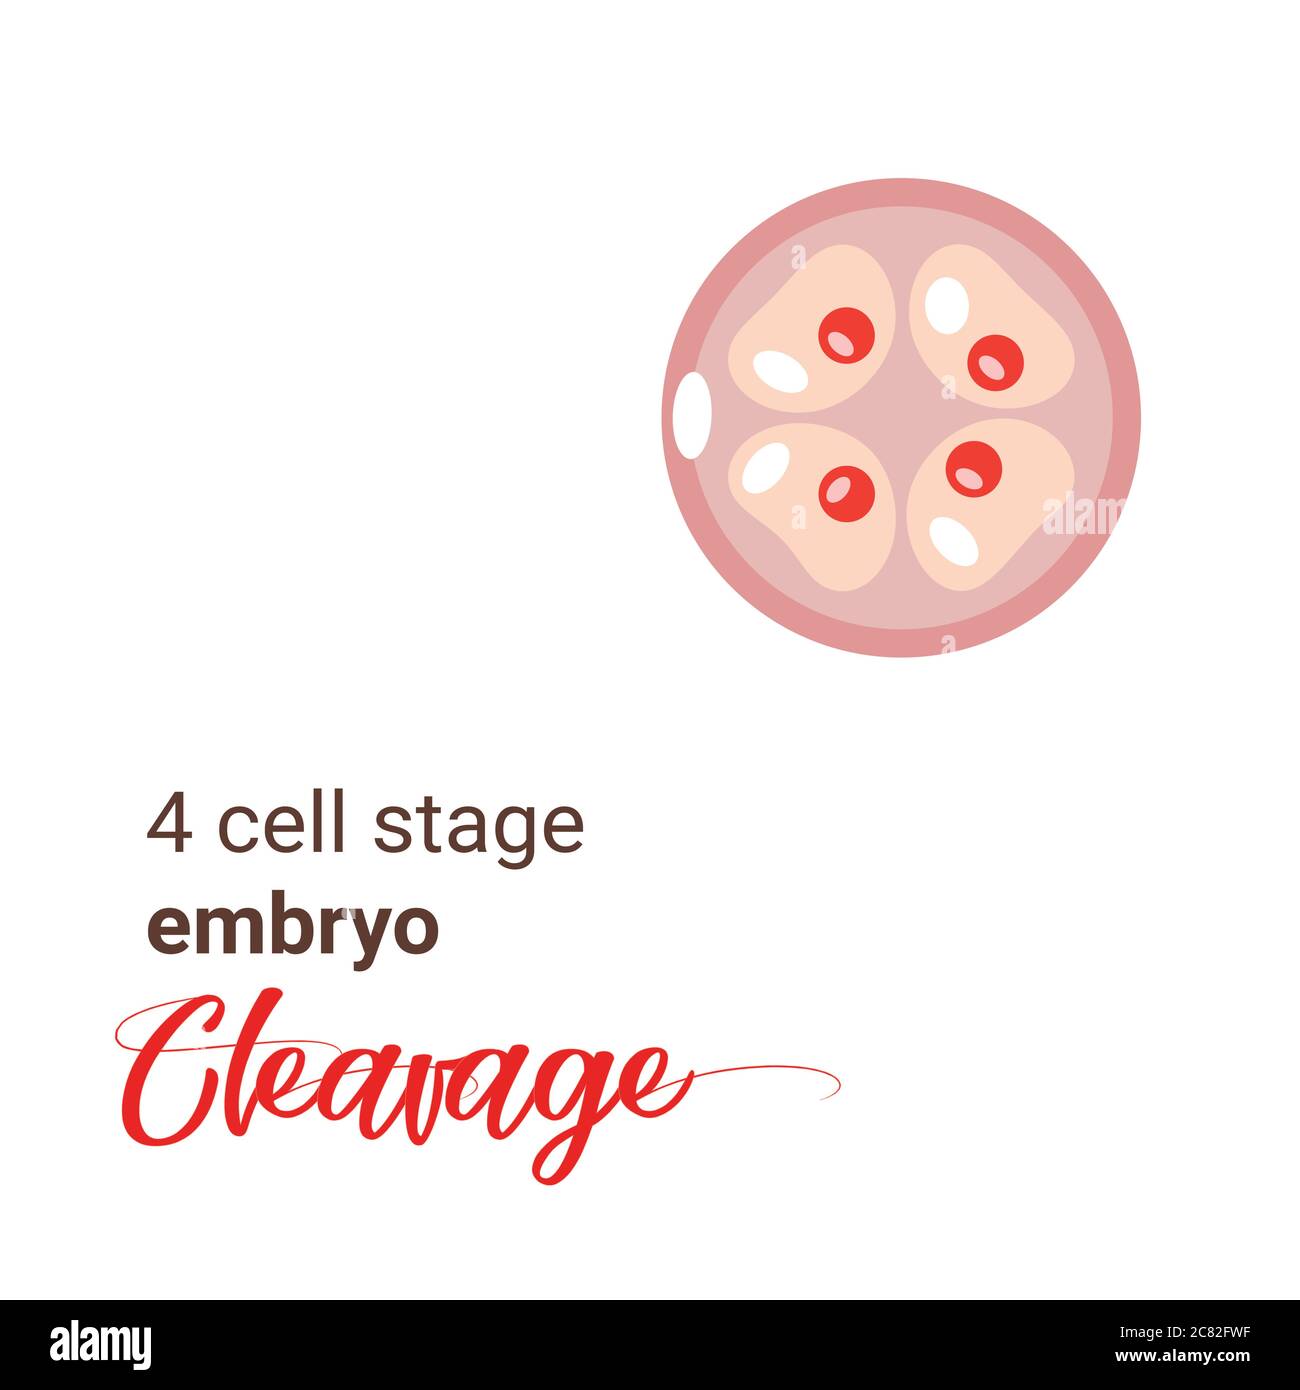 Illustration of a 4 cell stage embryo. Four cell stage icon. Vector cleavage 4 cell. Illustration cleavage Stock Vector